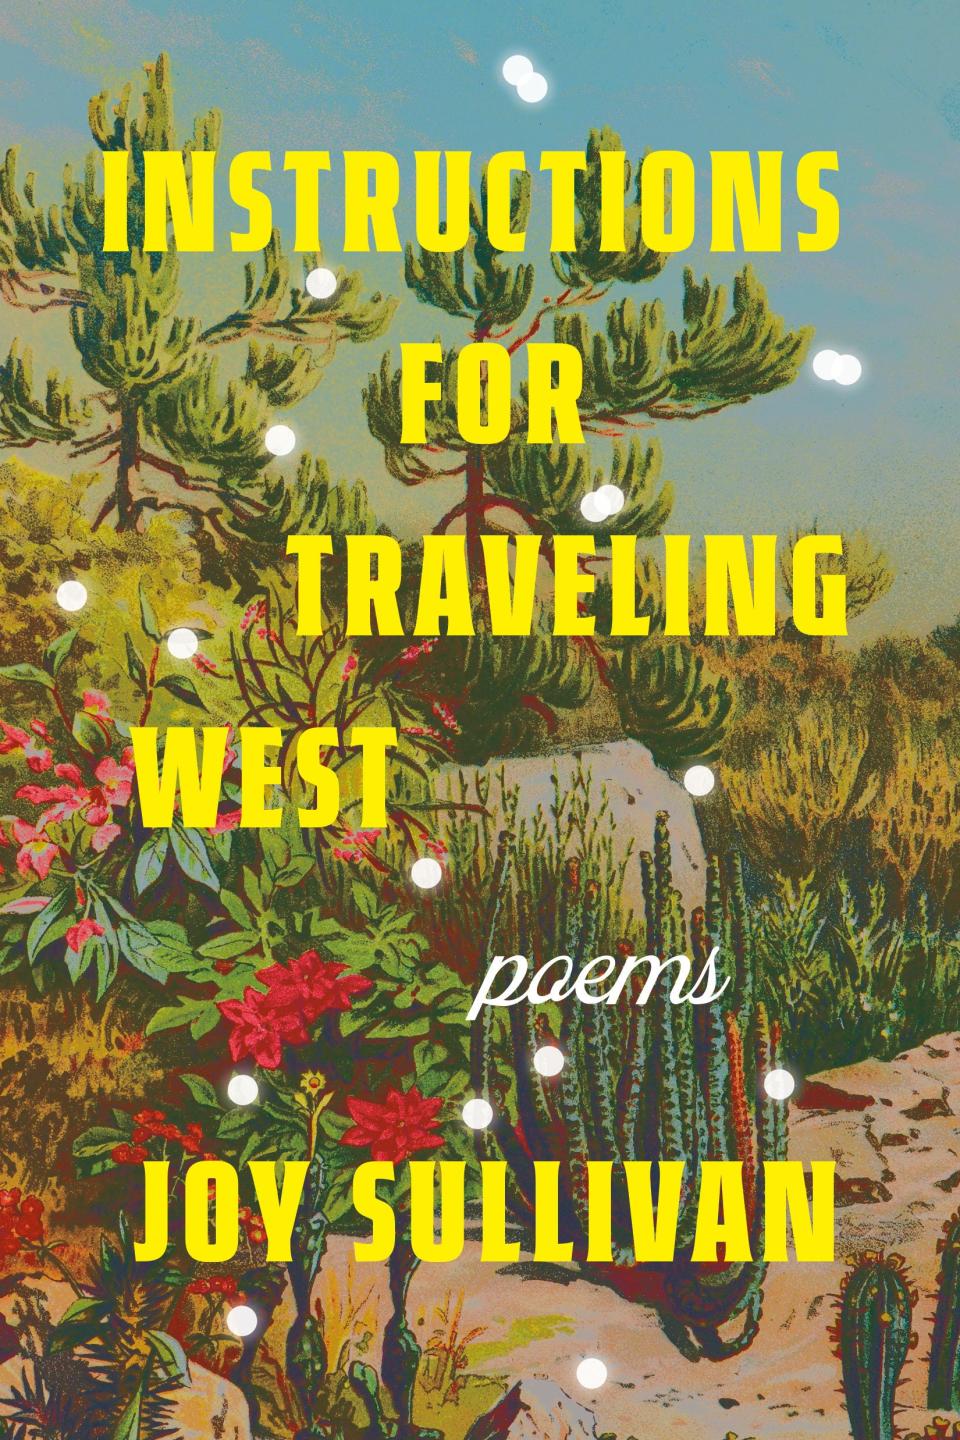 Poet Joy Sullivan's “Instructions for Traveling West,” due out on April 9, is a "loosely memoiric" collection of work based on her various life experiences.